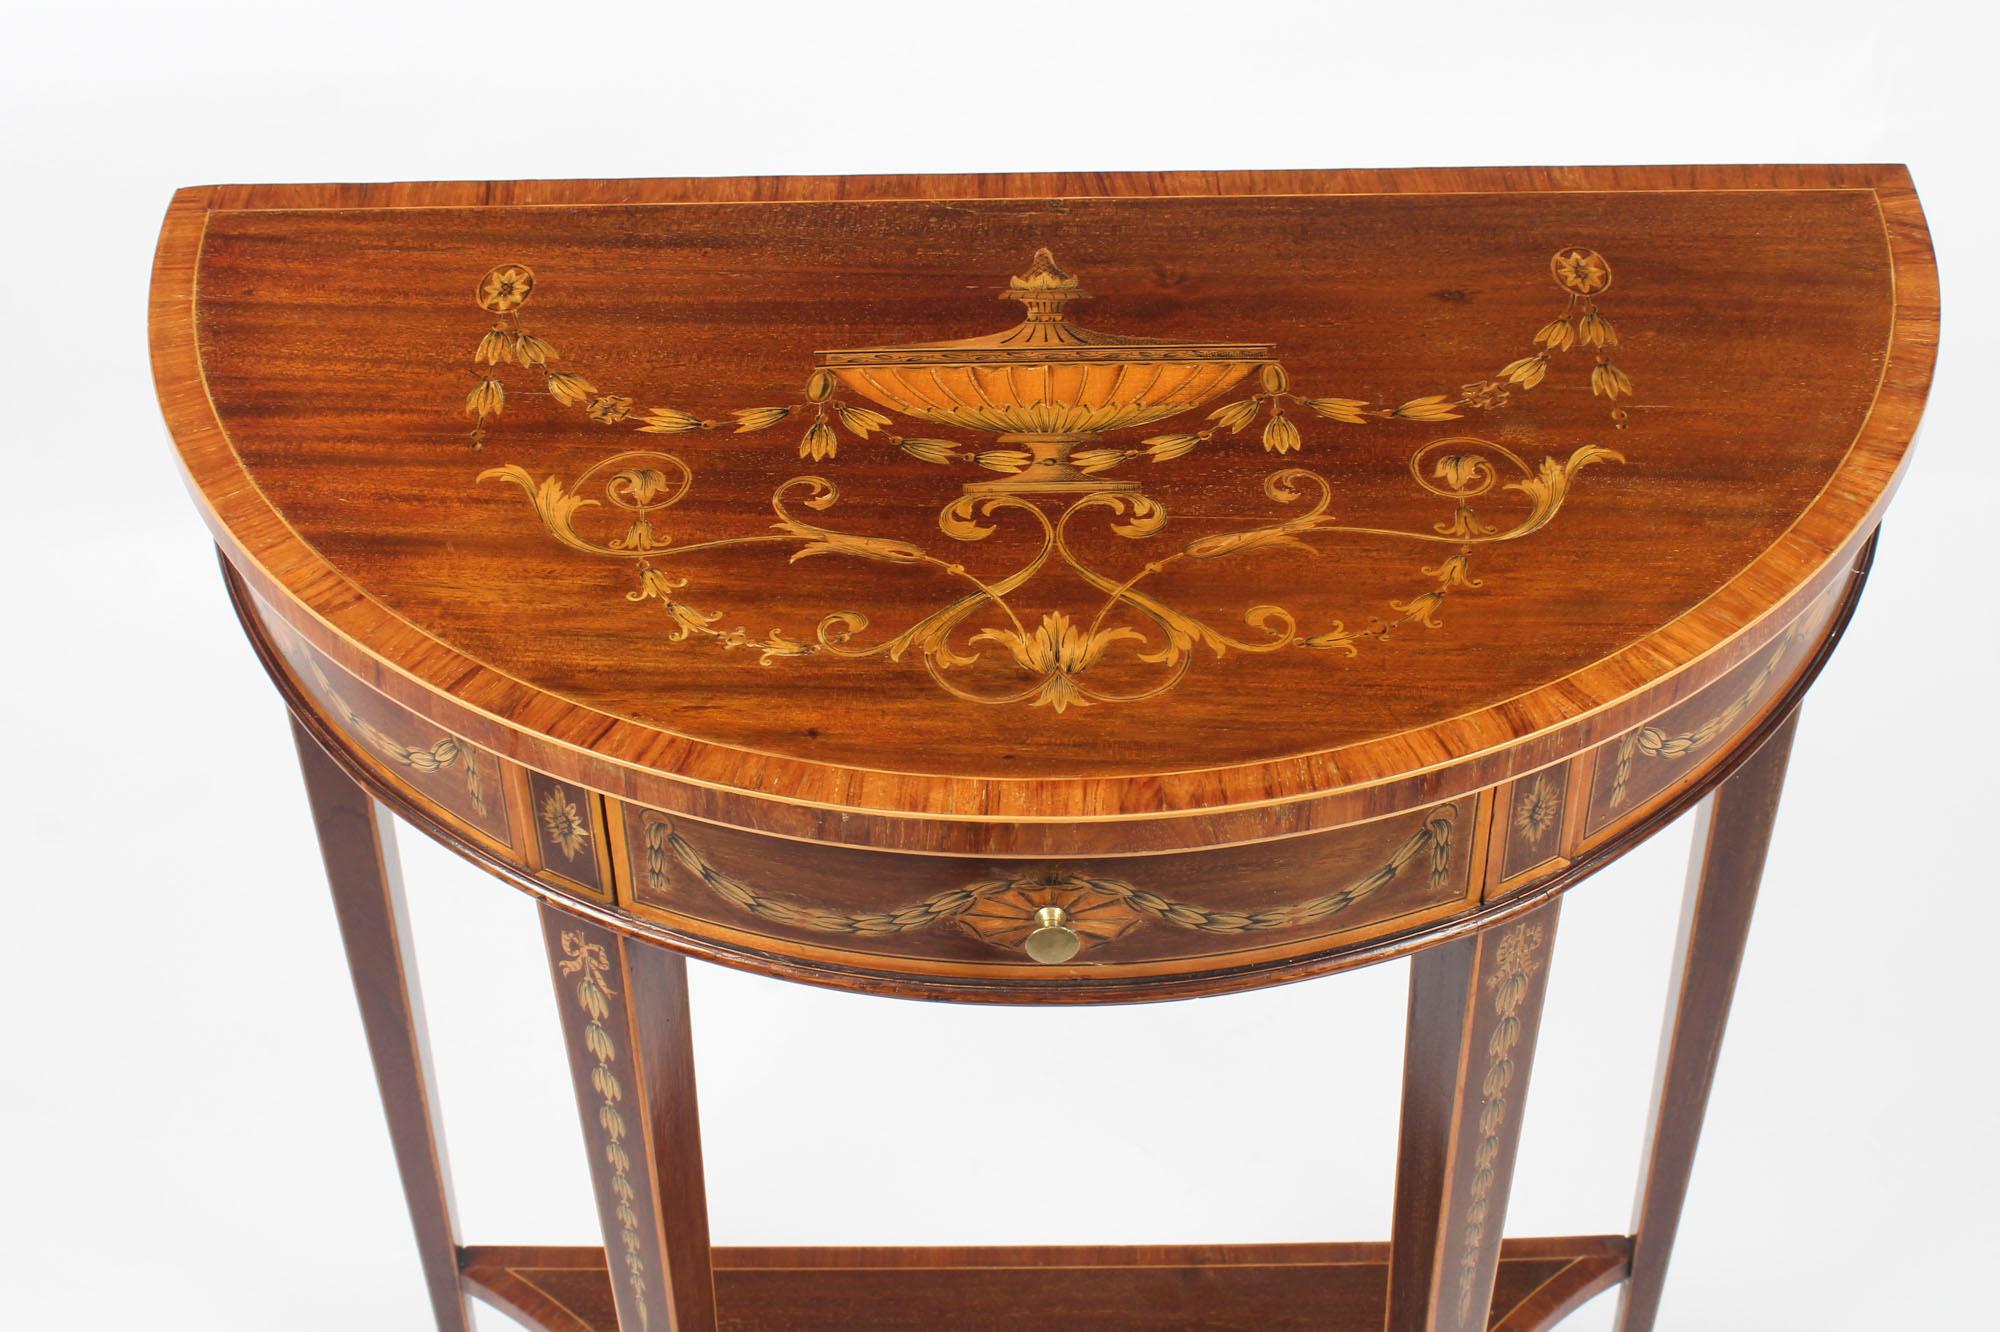 This is a beautiful antique English Regency Revival mahogany and marquetry demilune console table, circa 1900 in-date.

The half-round table top is beautifully framed with a satinwood border and has a finely inlaid marquetry central urn within